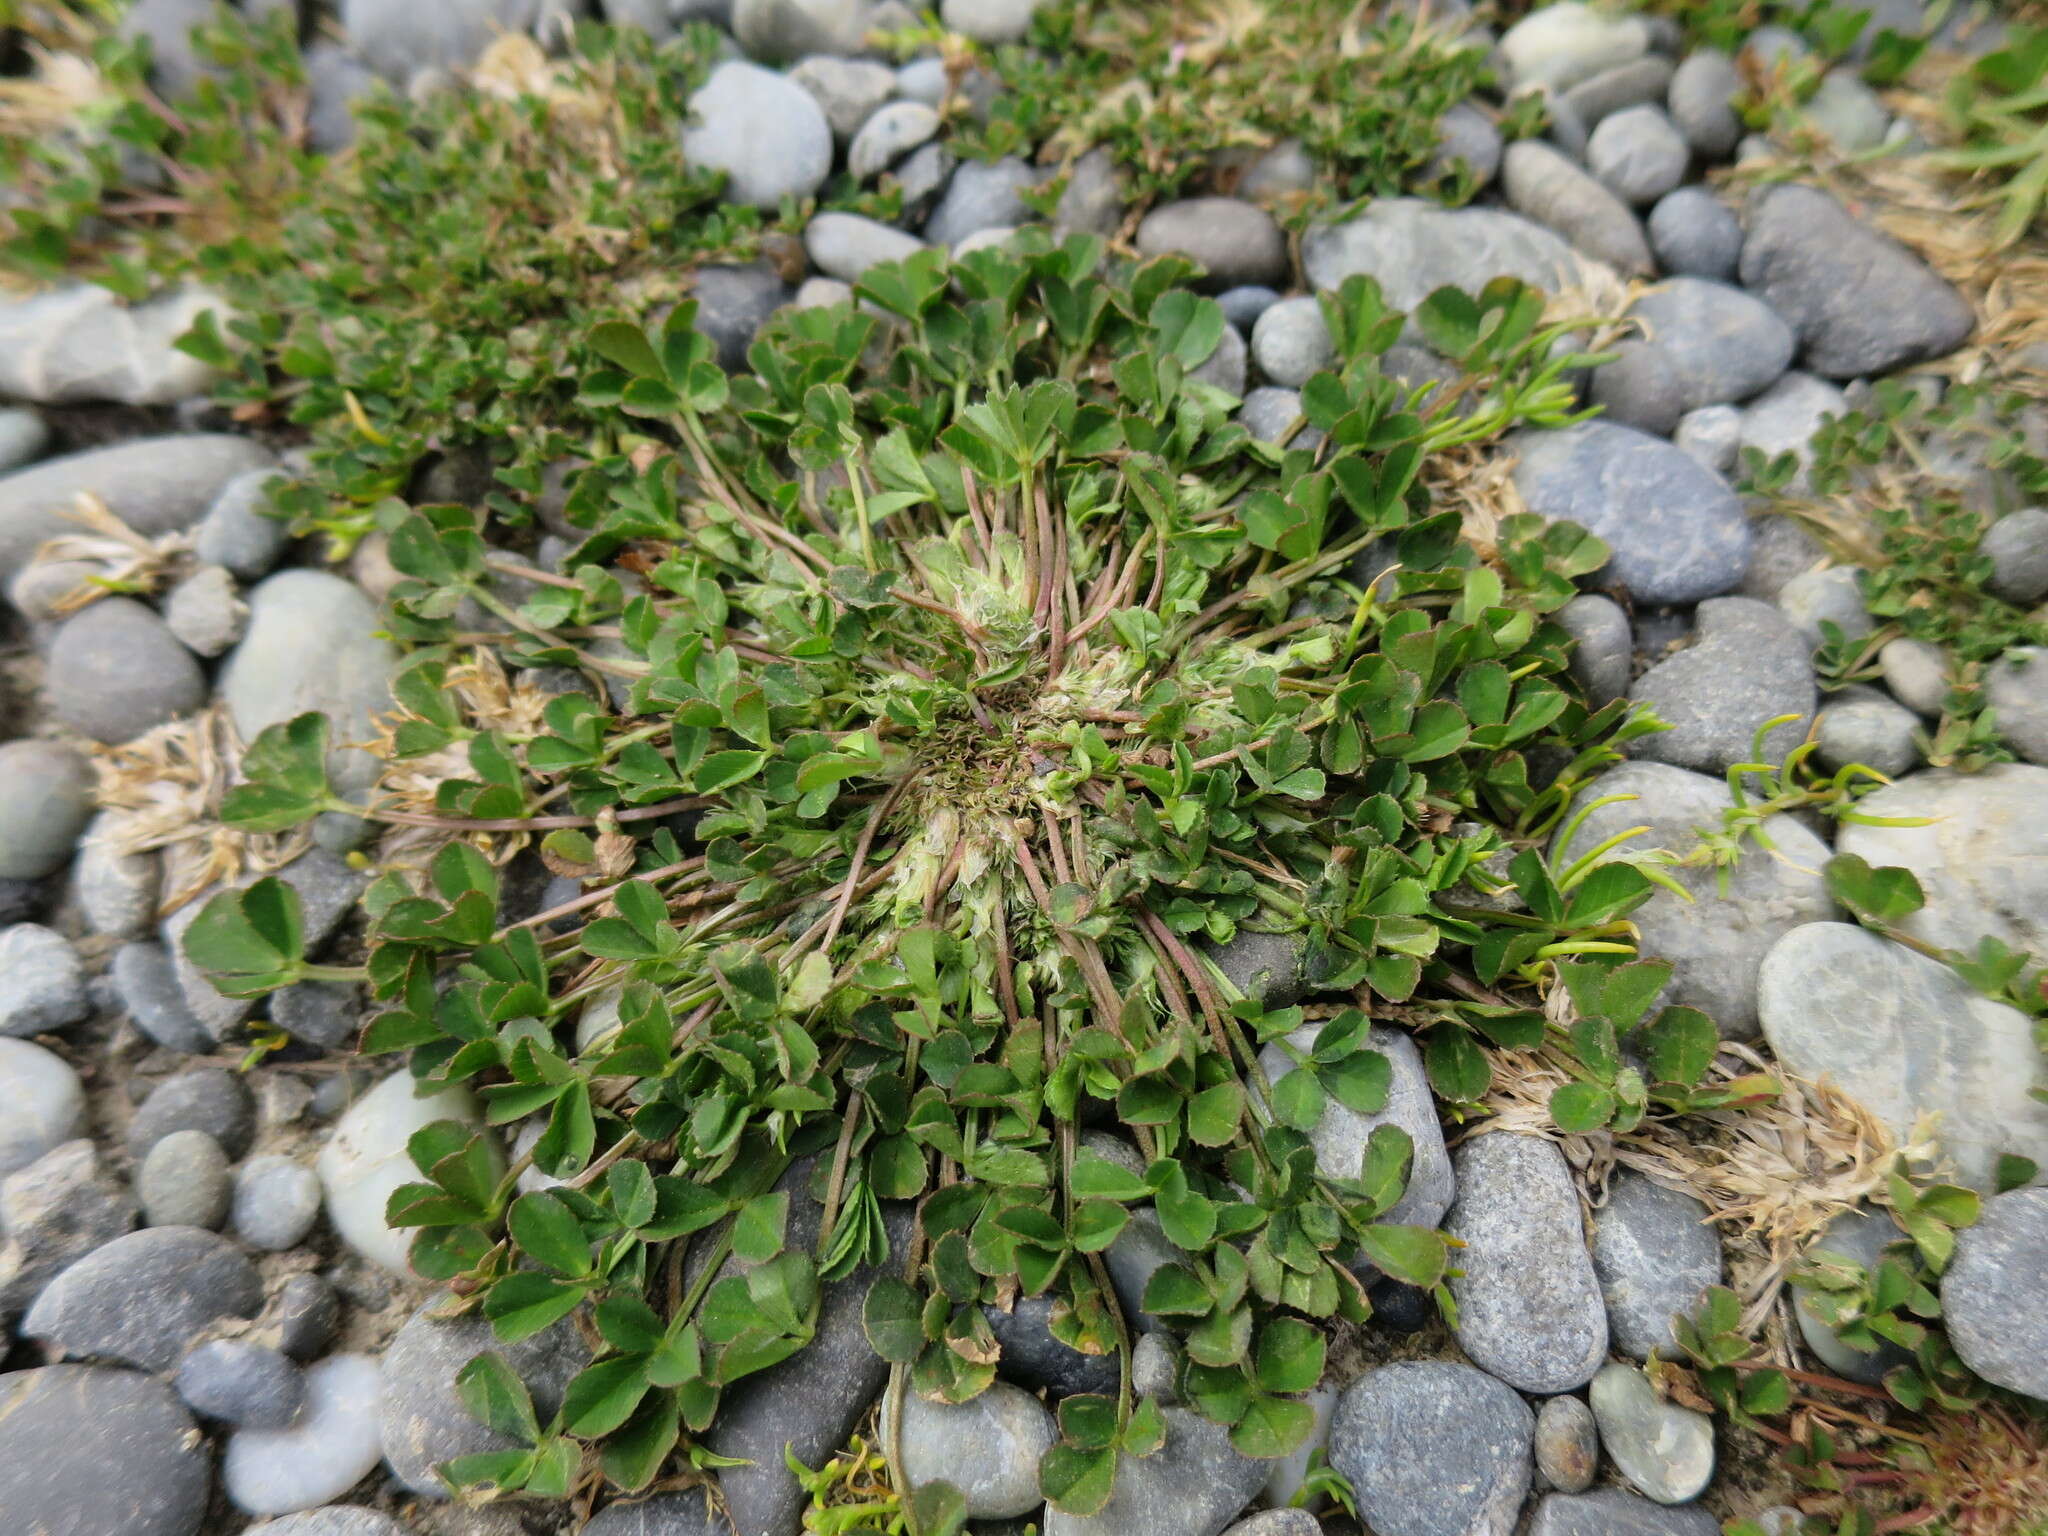 Image of suffocating clover